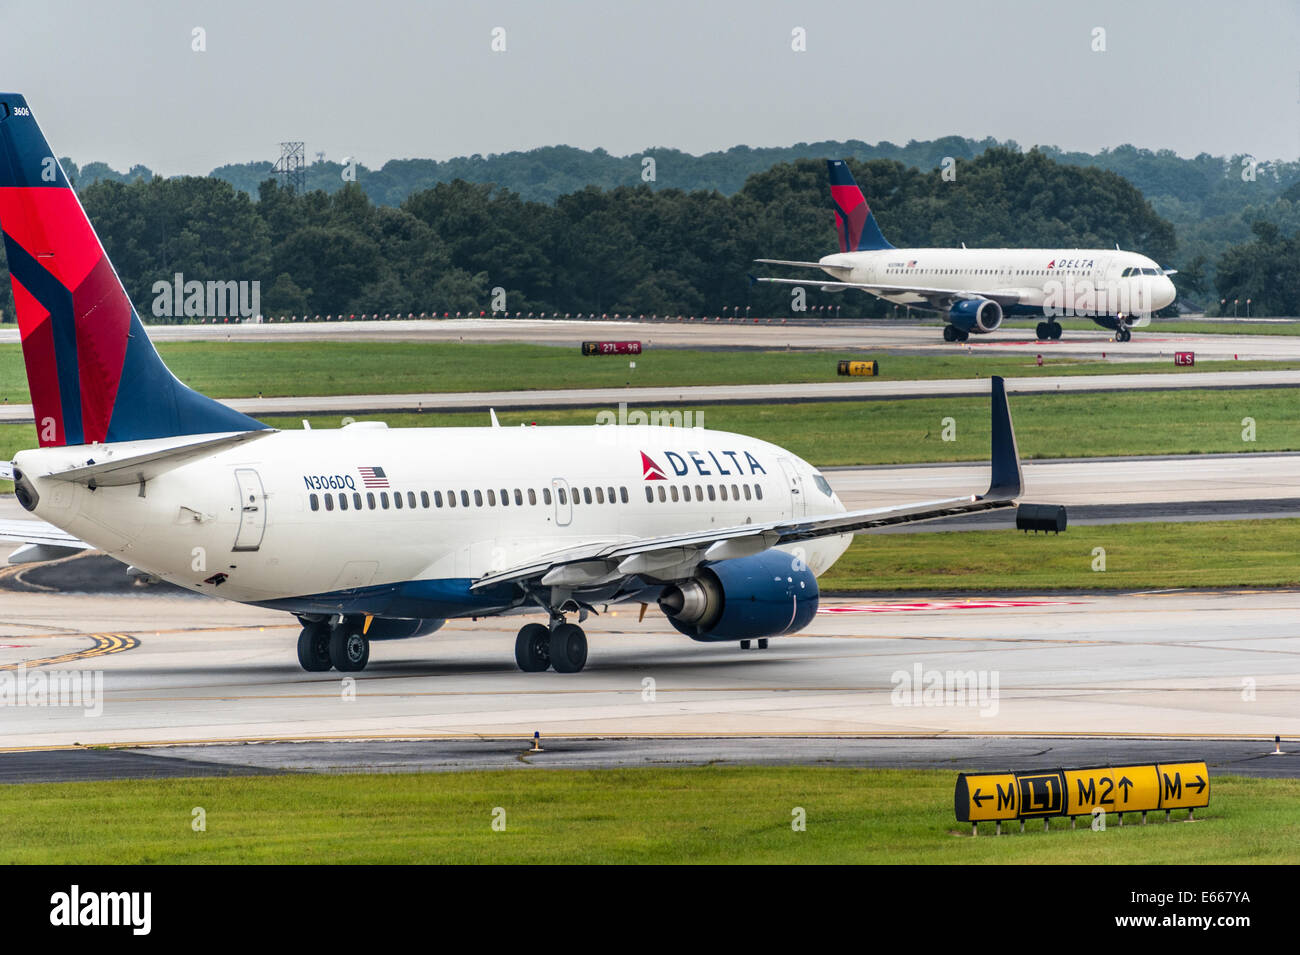 Delta Airlines passenger jets on taxiways at Hartsfield-Jackson Atlanta International Airport, the world's busiest airport. USA. Stock Photo